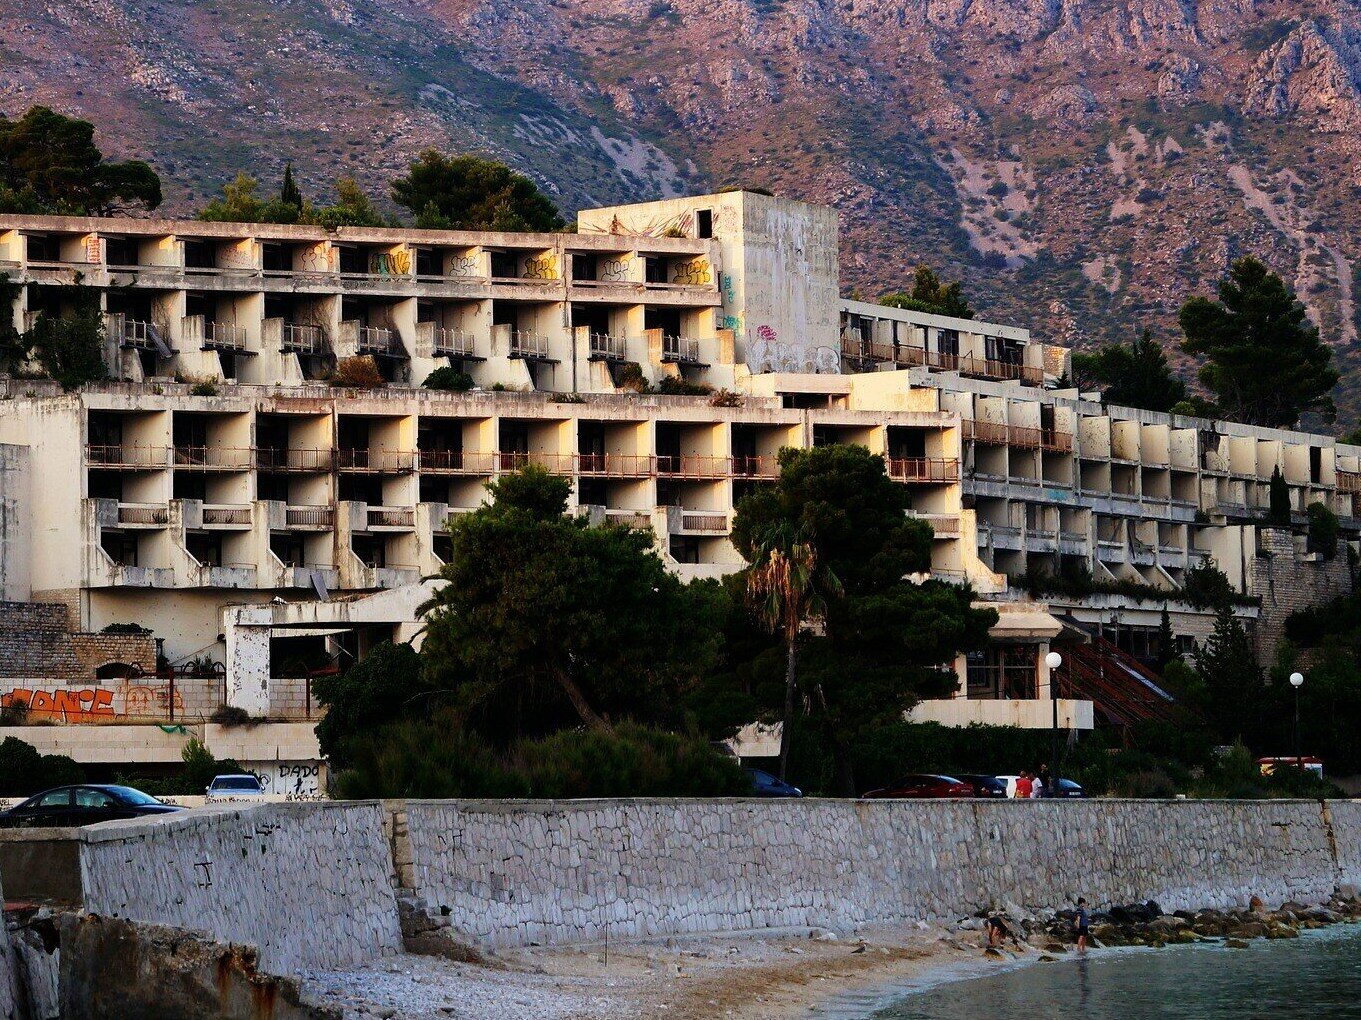 An abandoned resort in Croatia is decaying and haunting.  The authorities have a plan to "revive" it